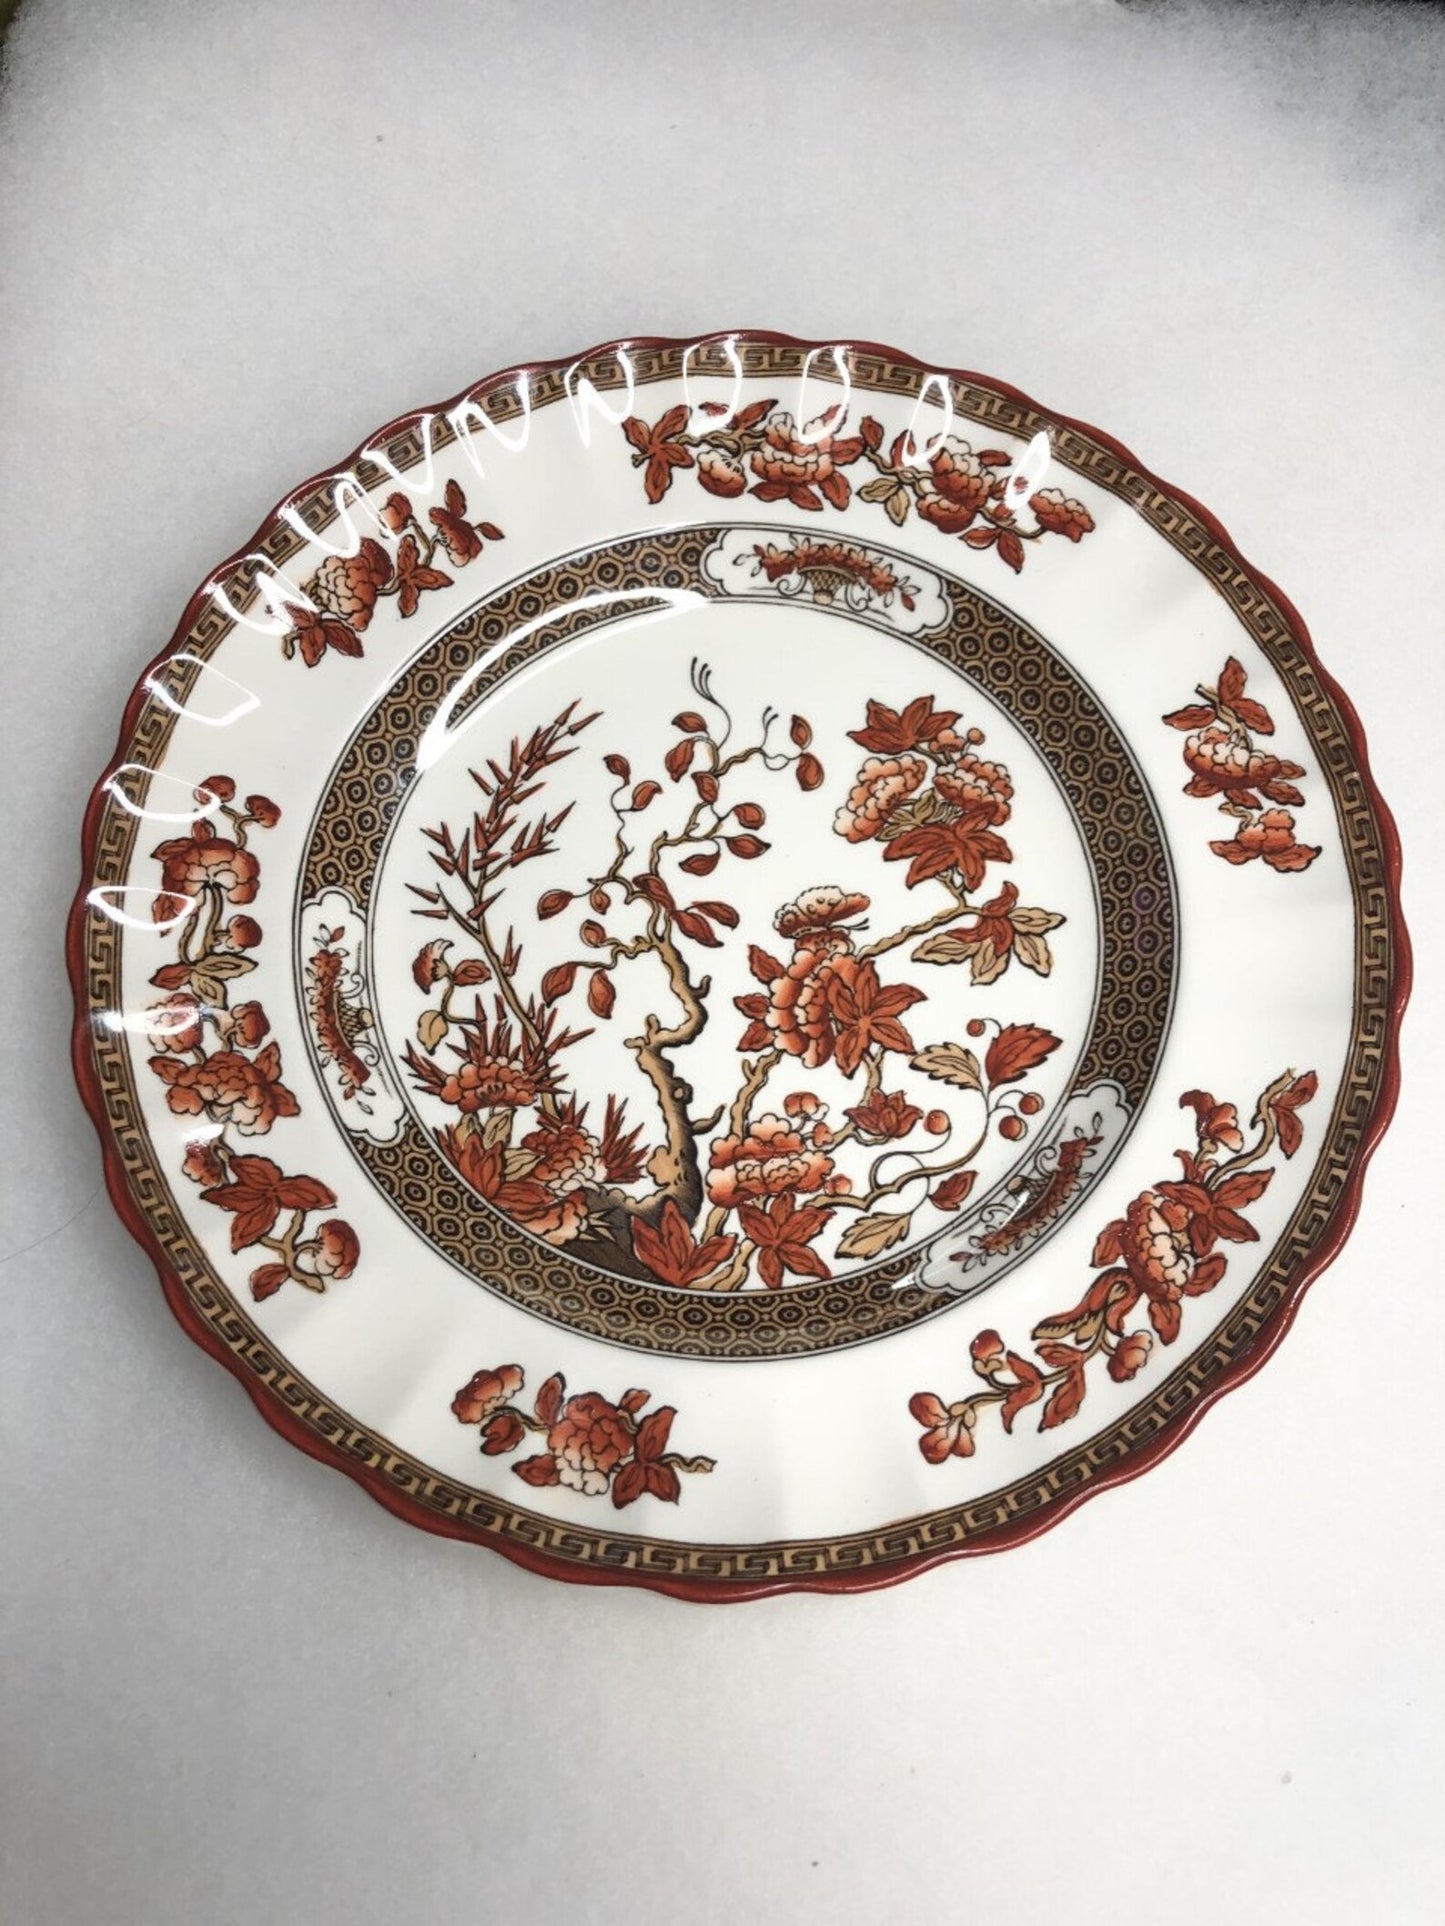 Spode Copeland India Tree Salad Plates (sold as set of 8) # IndiaTree #SpodeCopeland #SaladPlates - DharBazaar